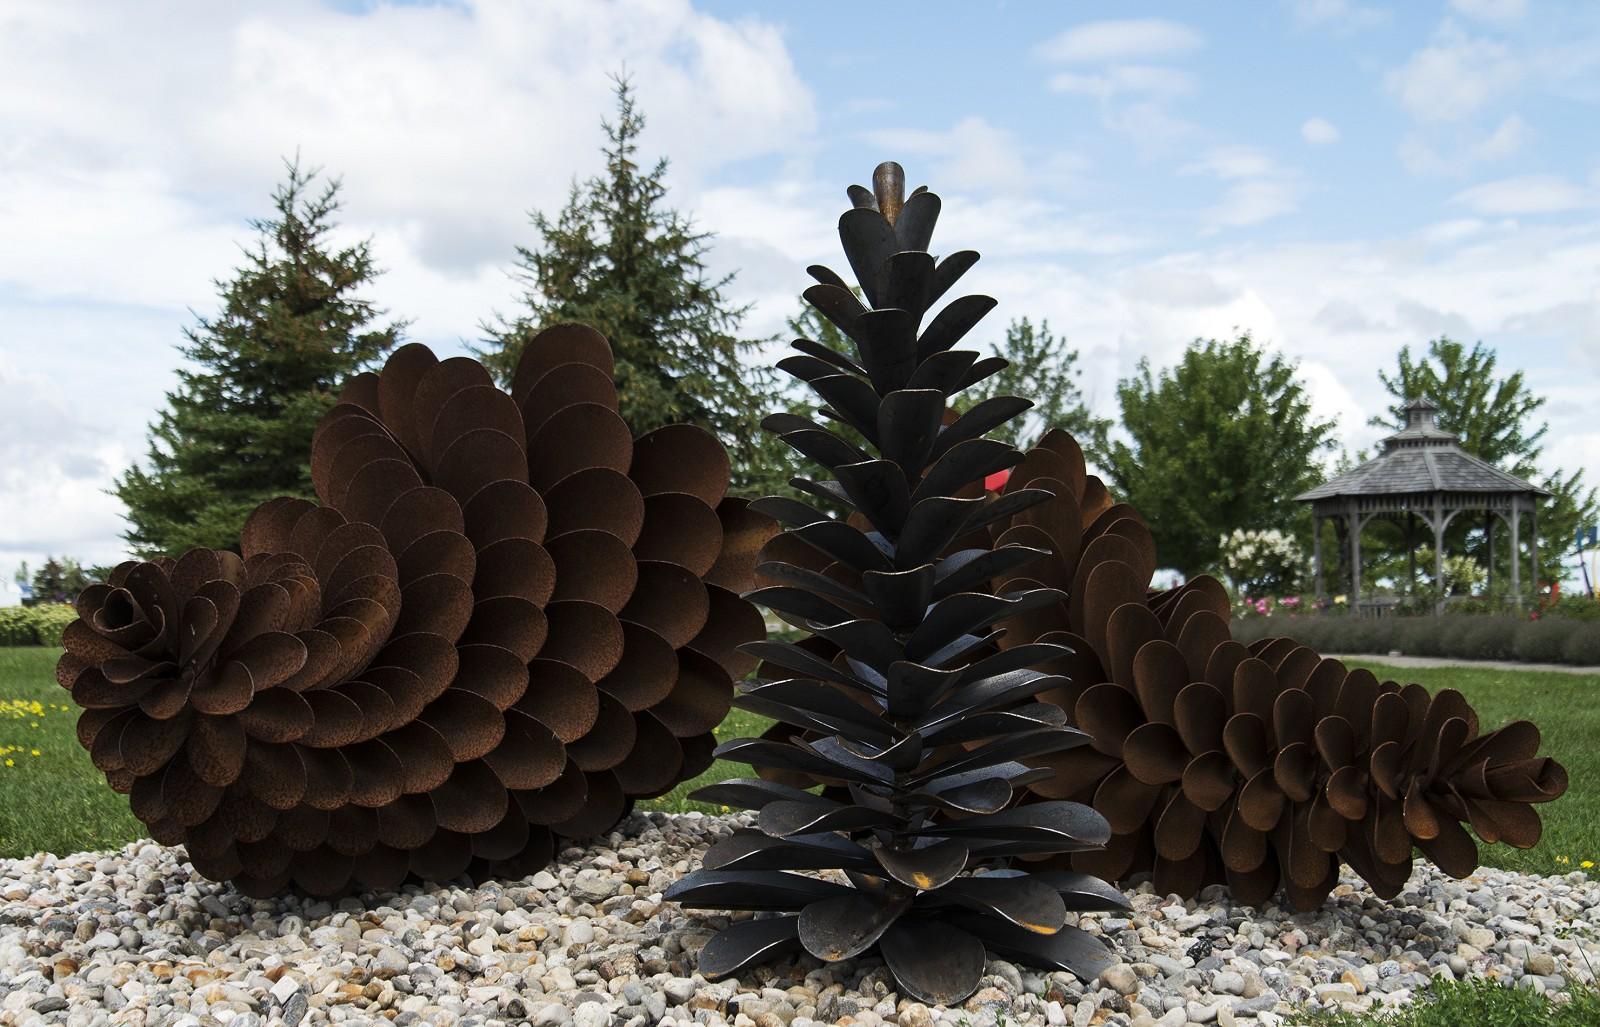 Pine Cone Sculpture 20167 - large, naturally rusted, weathered steel sculpture - Black Still-Life Sculpture by Floyd Elzinga